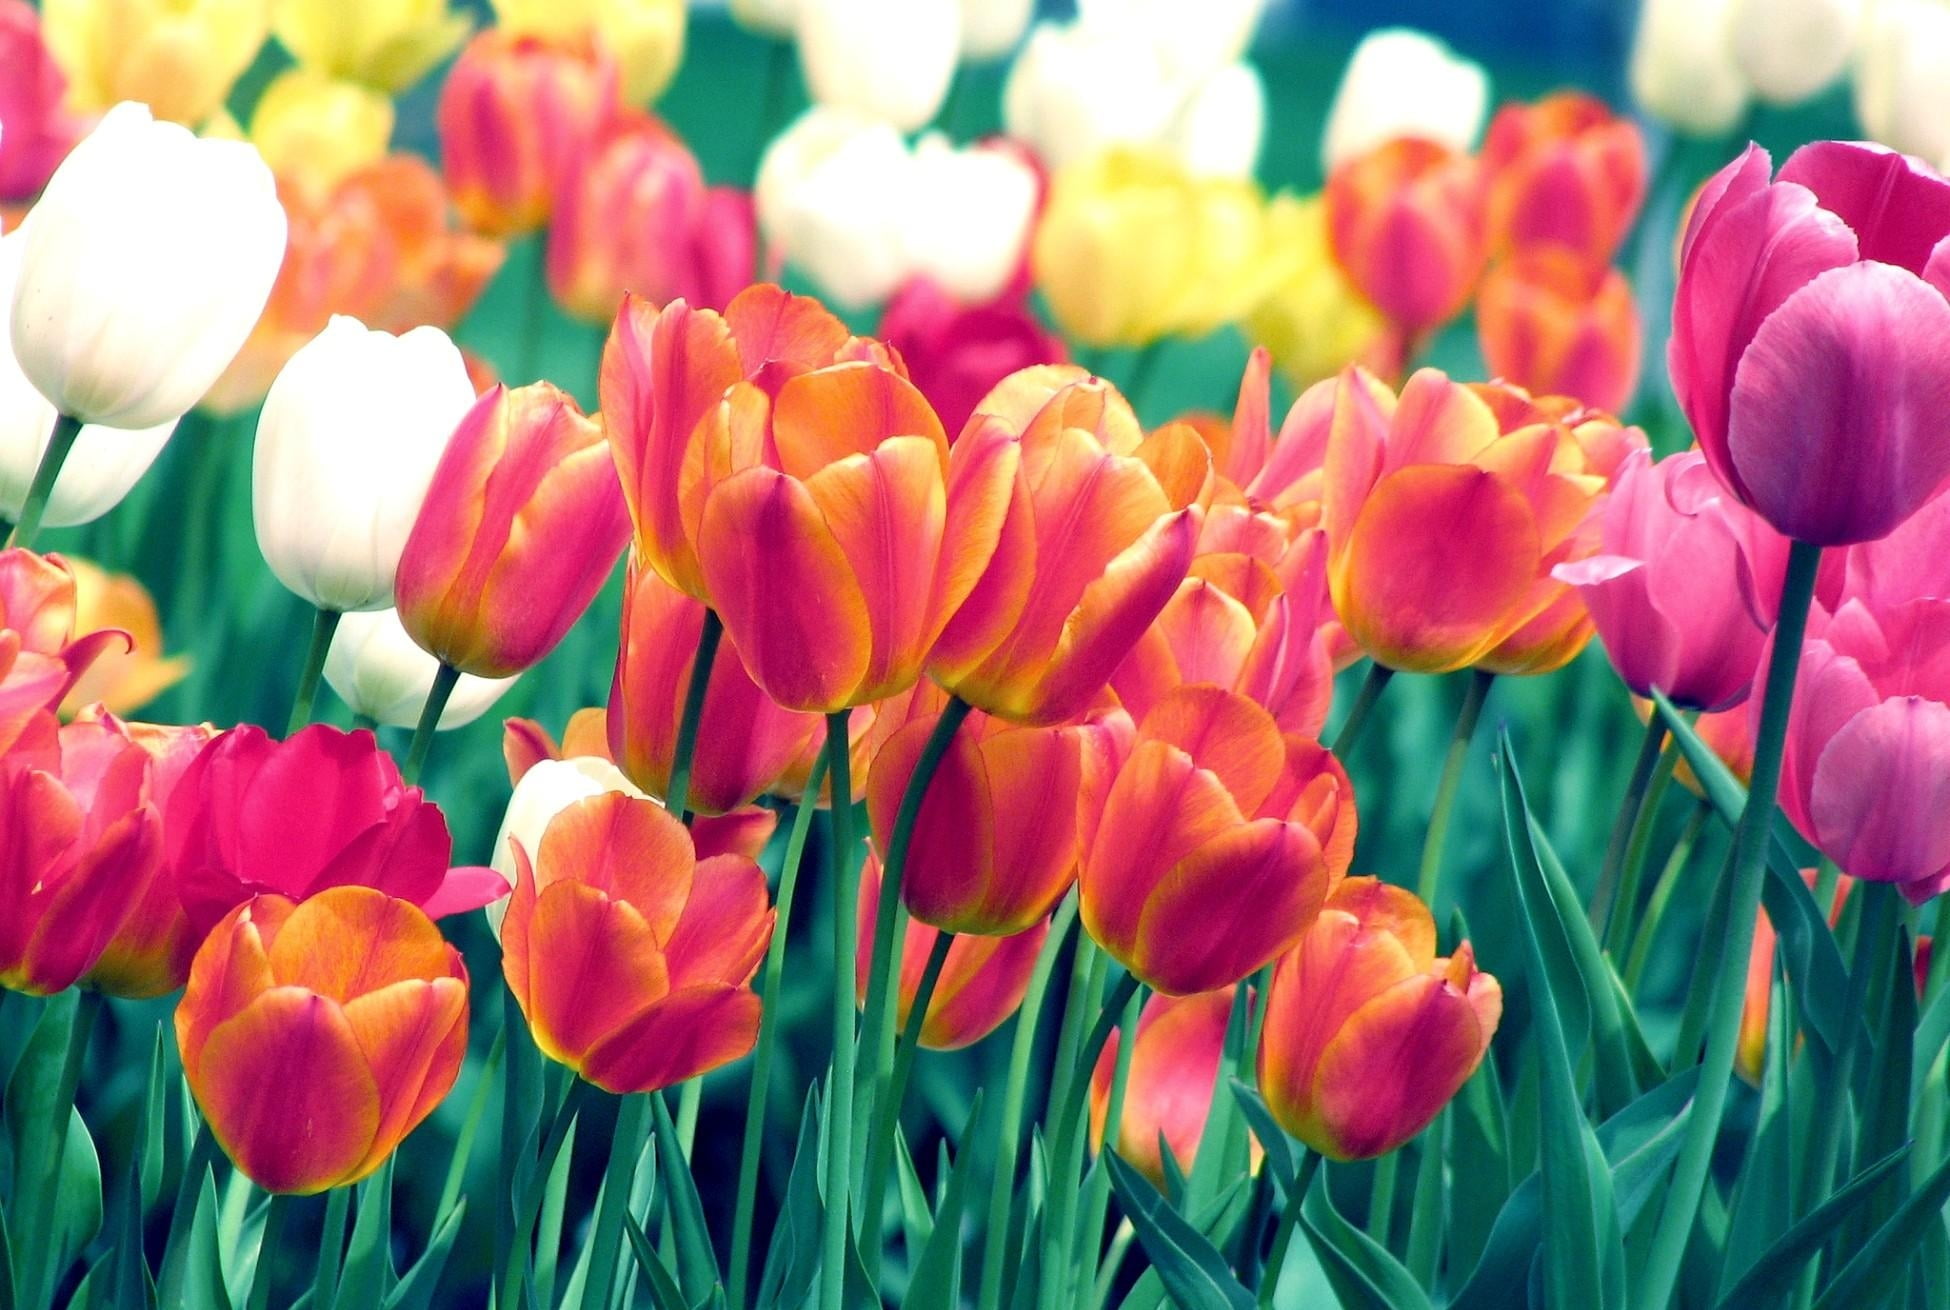 pink, white, and orange tulips field